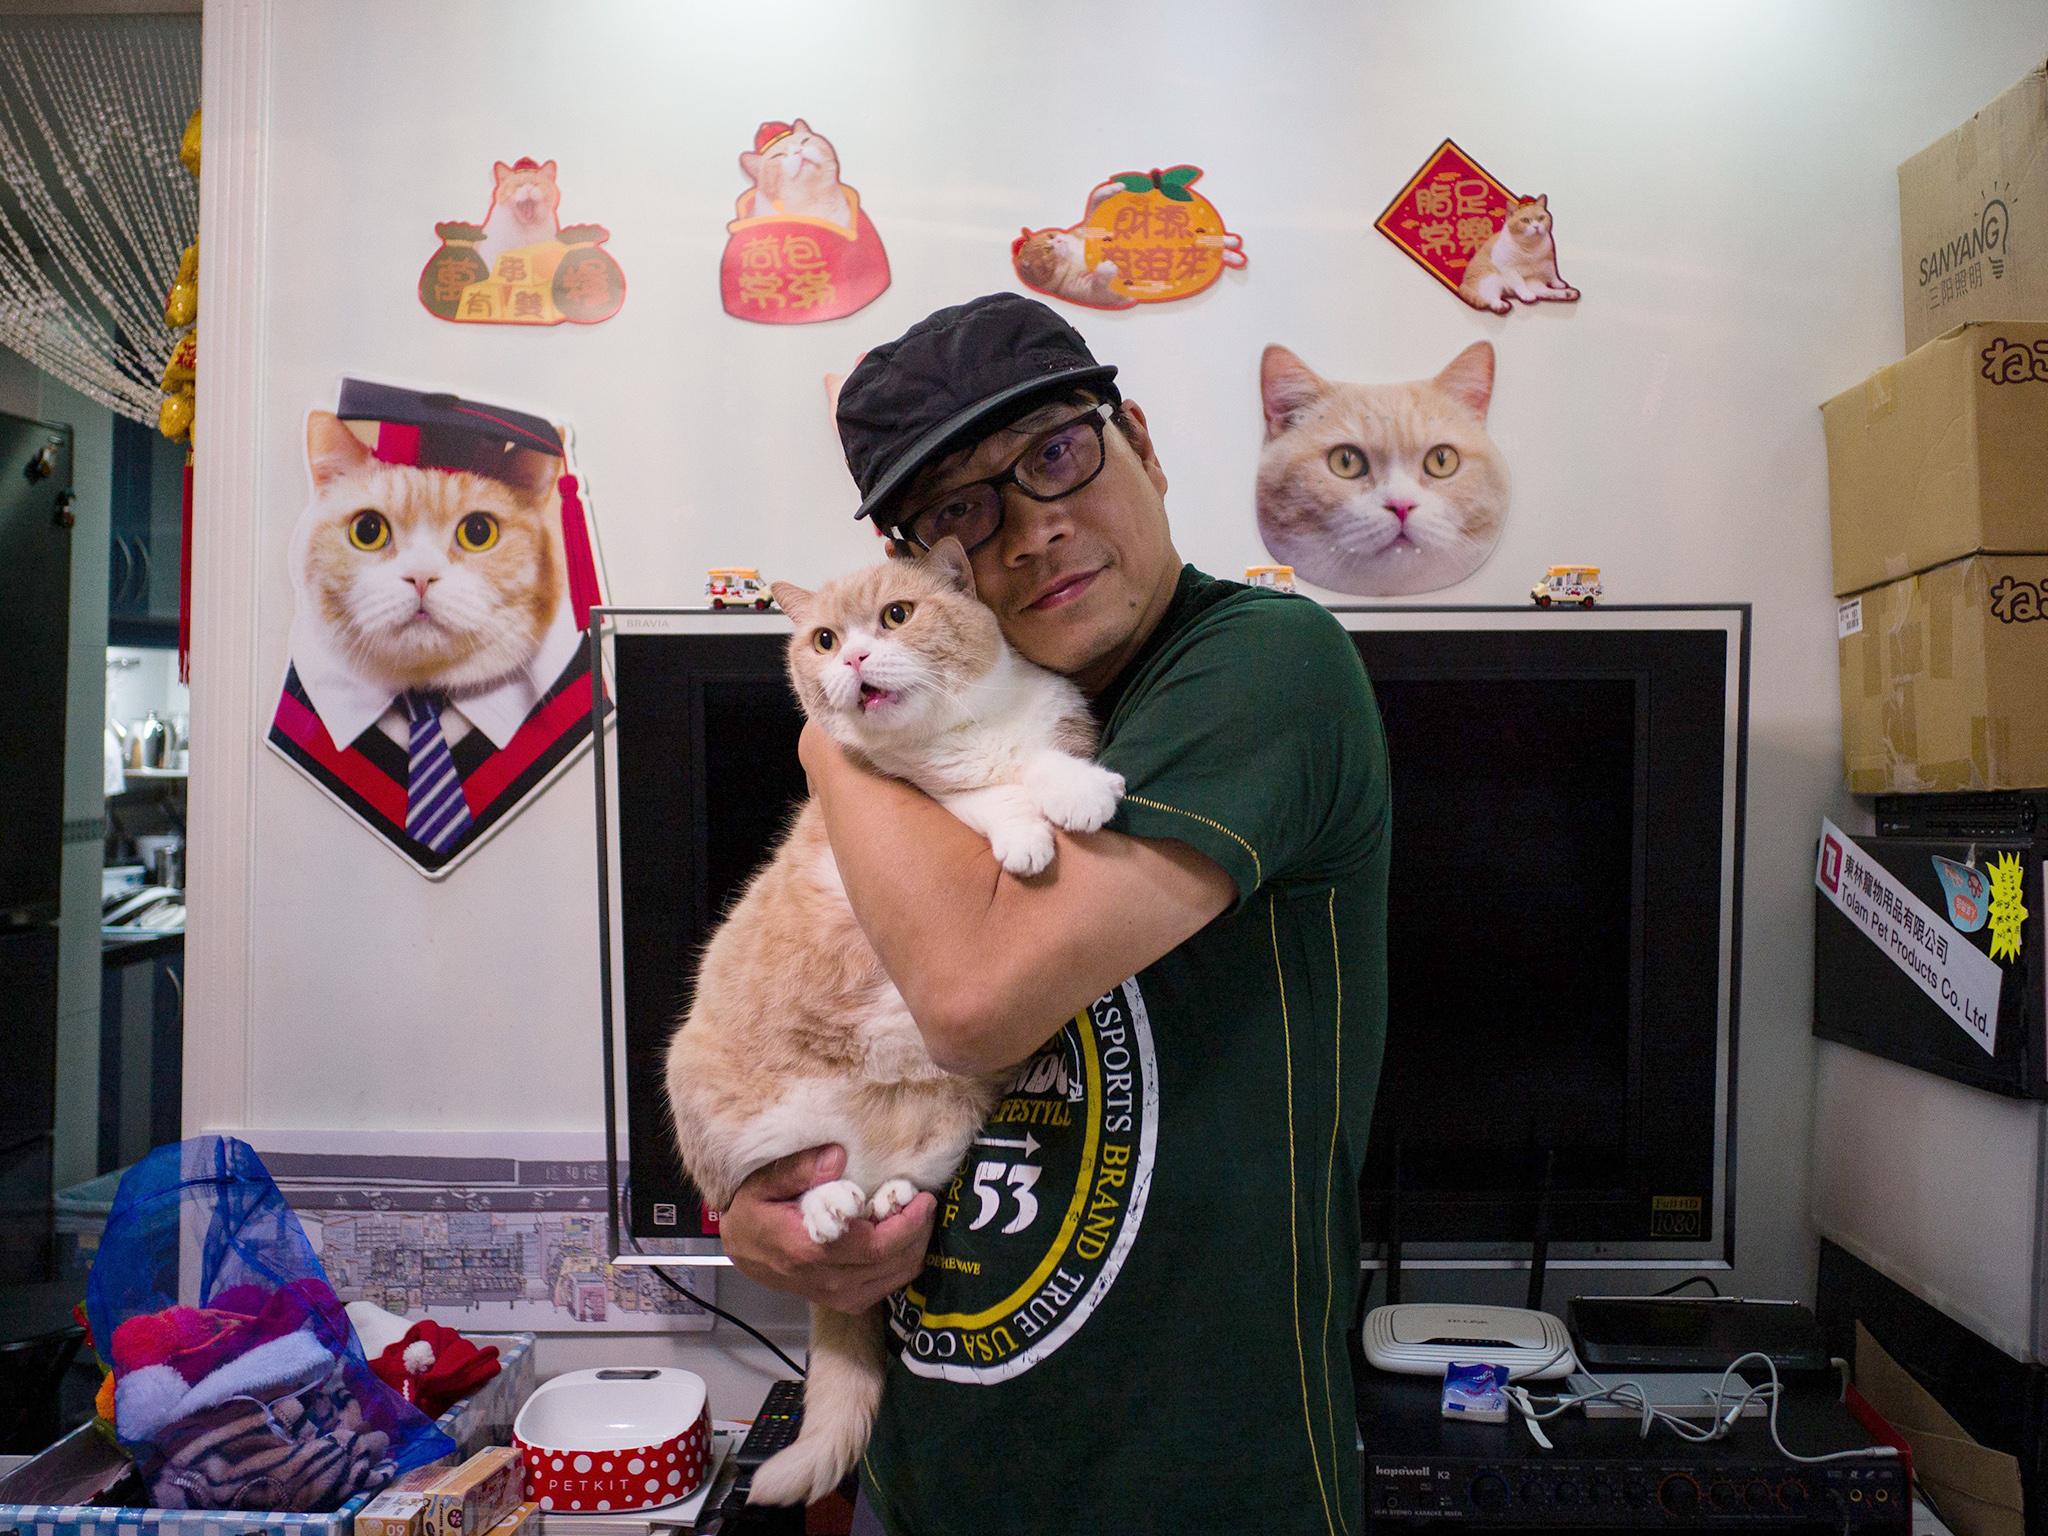 Ko Chee-shing poses with his cat Cream Brother in Hong Kong